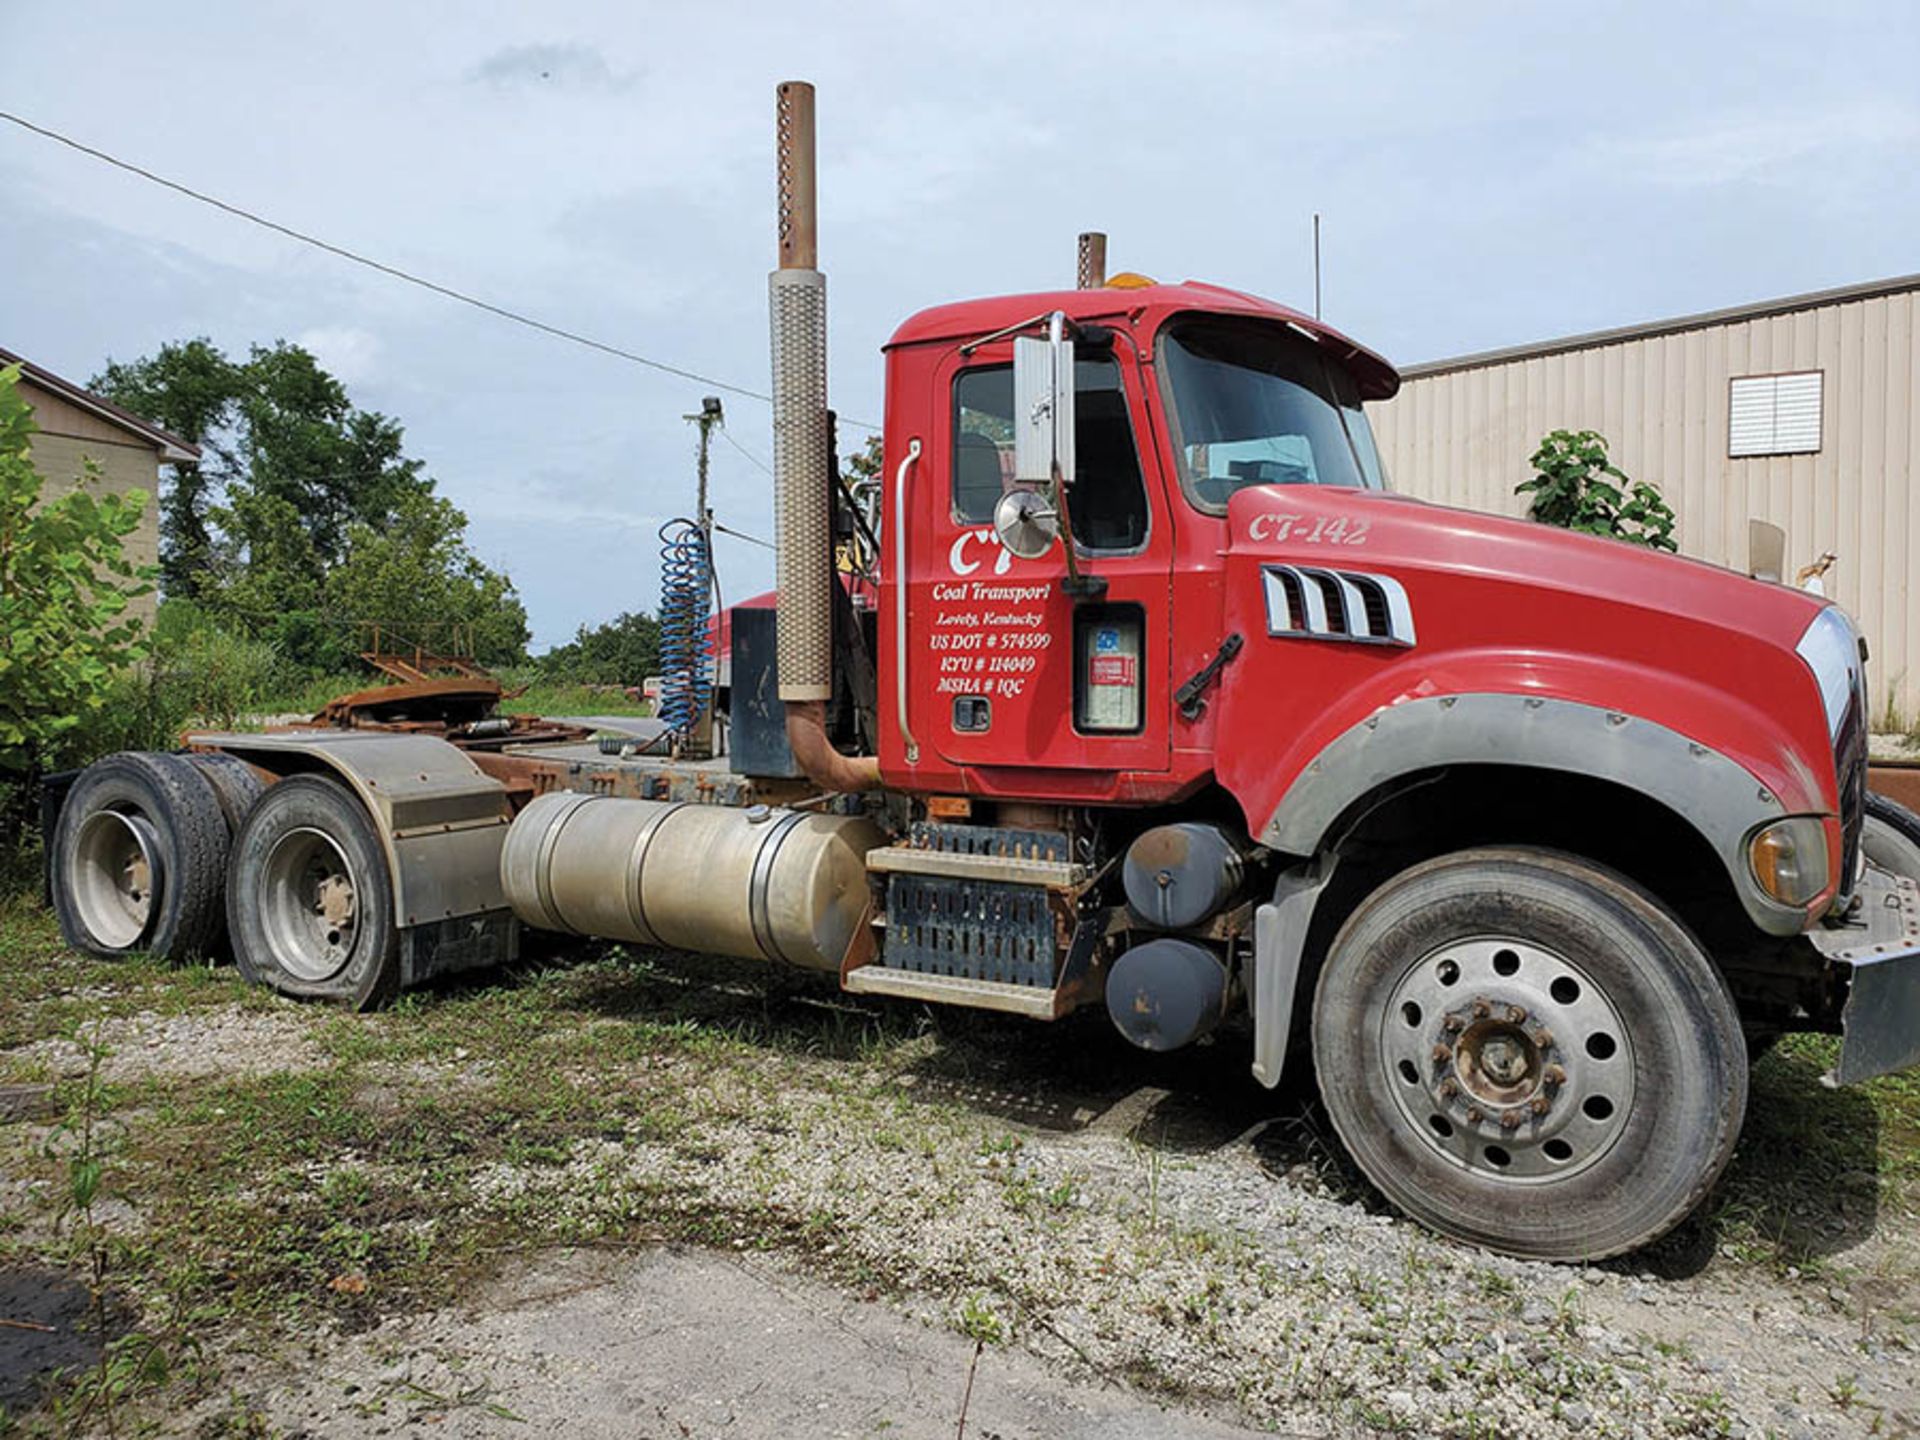 2009 MACK GU713 T/A DAY CAB TRACTOR, MAXITORQUE 18 SPEED TRANS., WET LINES MACK INLINE SIX DIESEL - Image 5 of 11